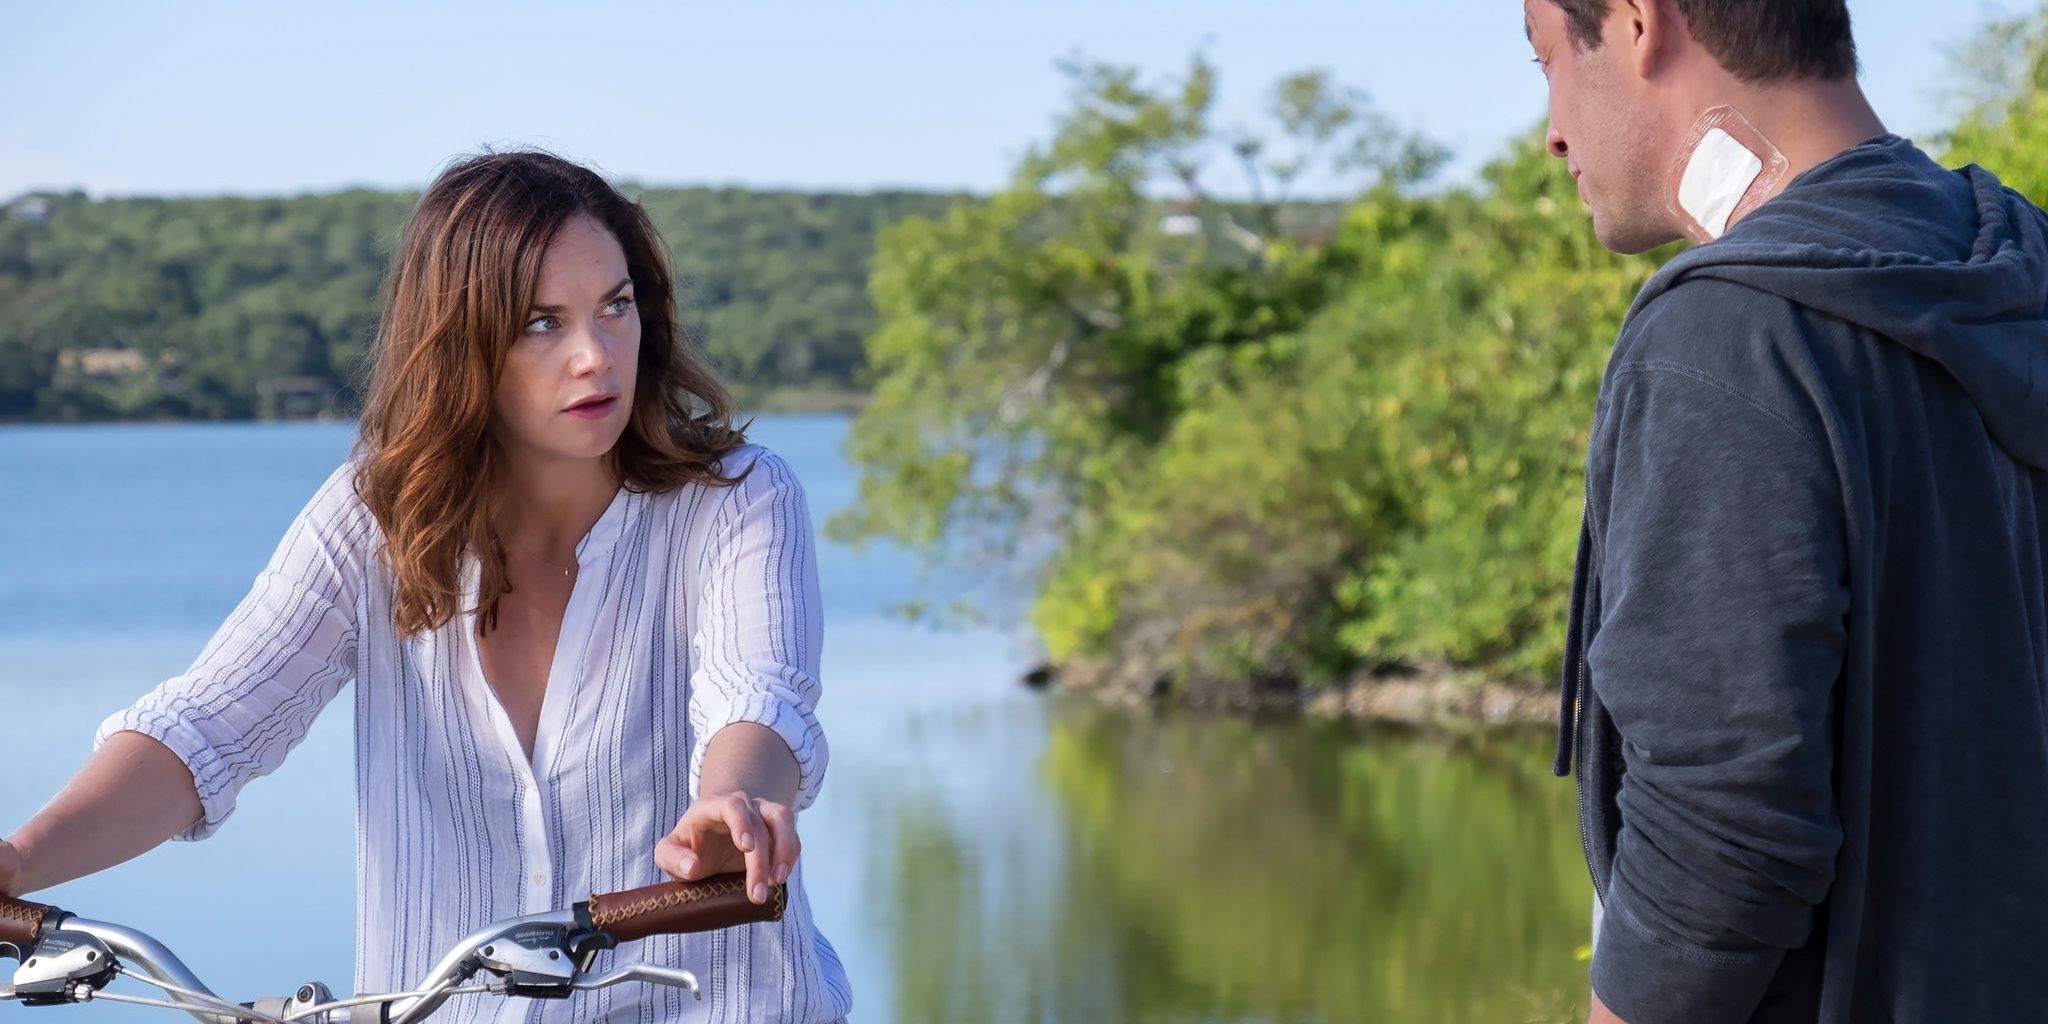 Which Character From The Affair Are You Based On Your Zodiac